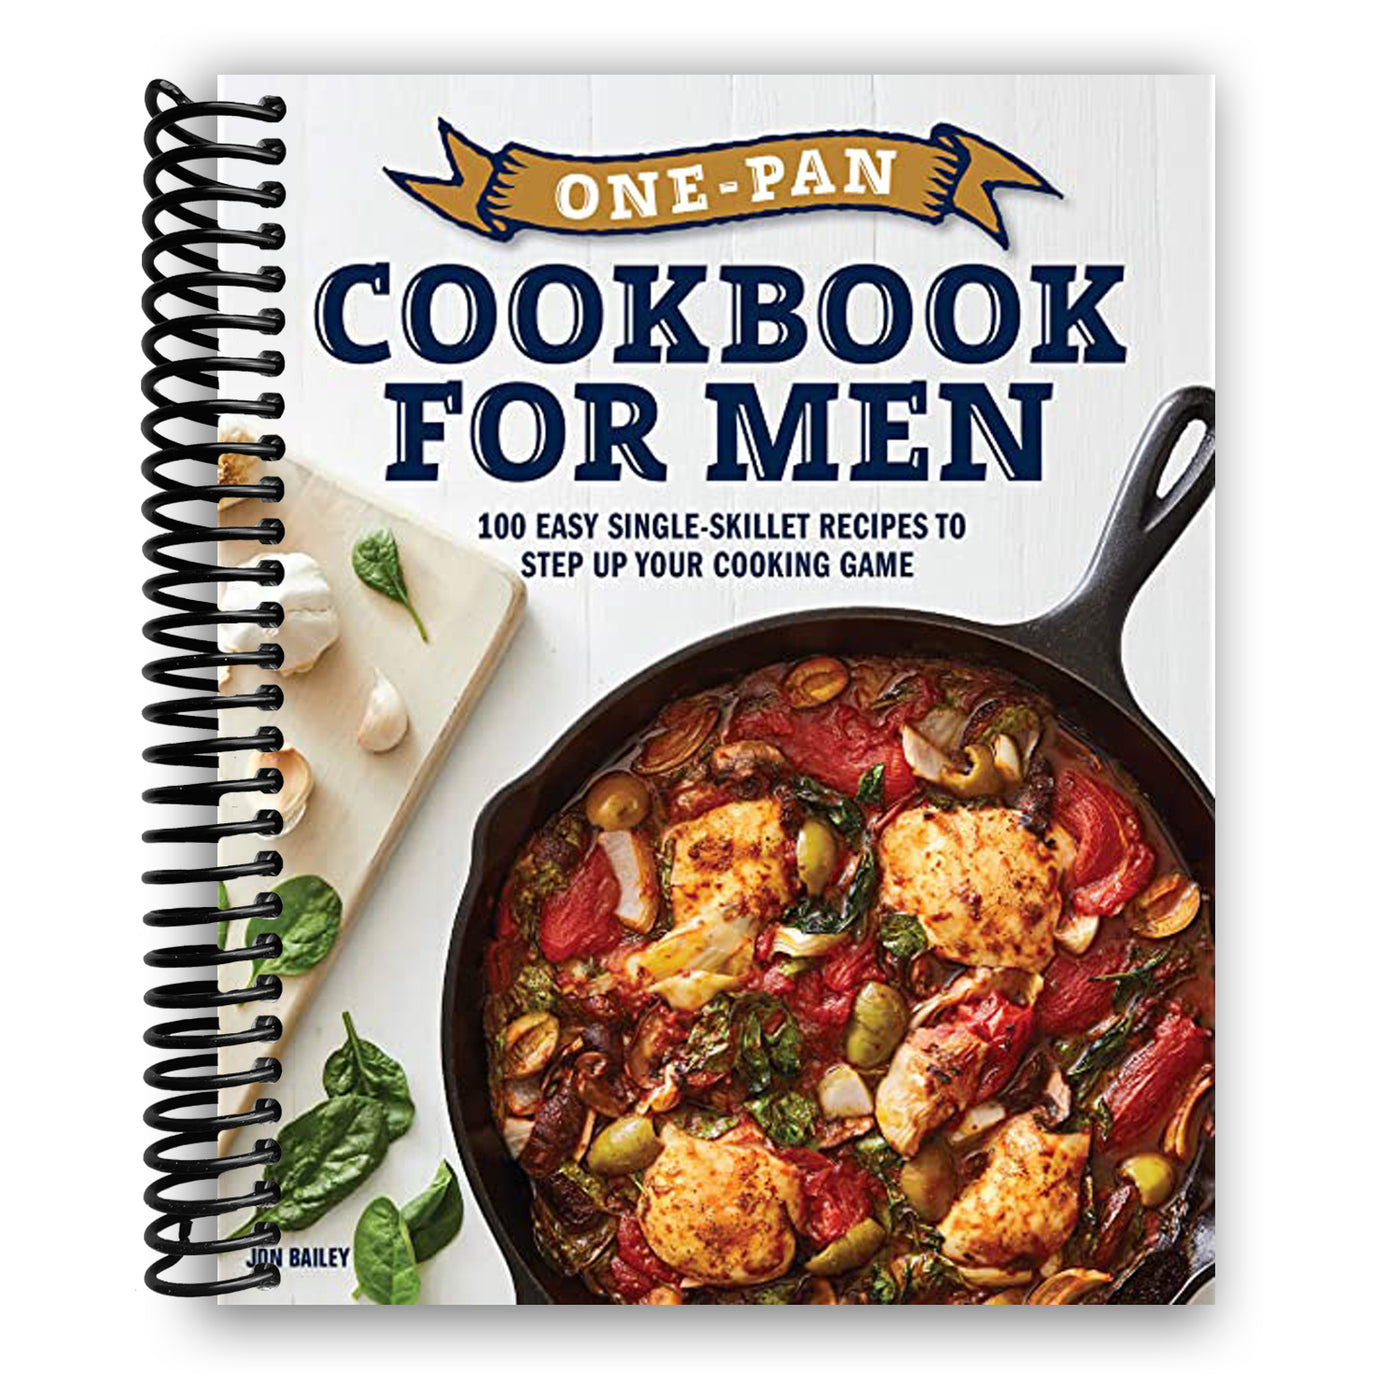 One-Pan Cookbook for Men: 100 Easy Single-Skillet Recipes to Step Up Your Cooking Game (Spiral Bound)